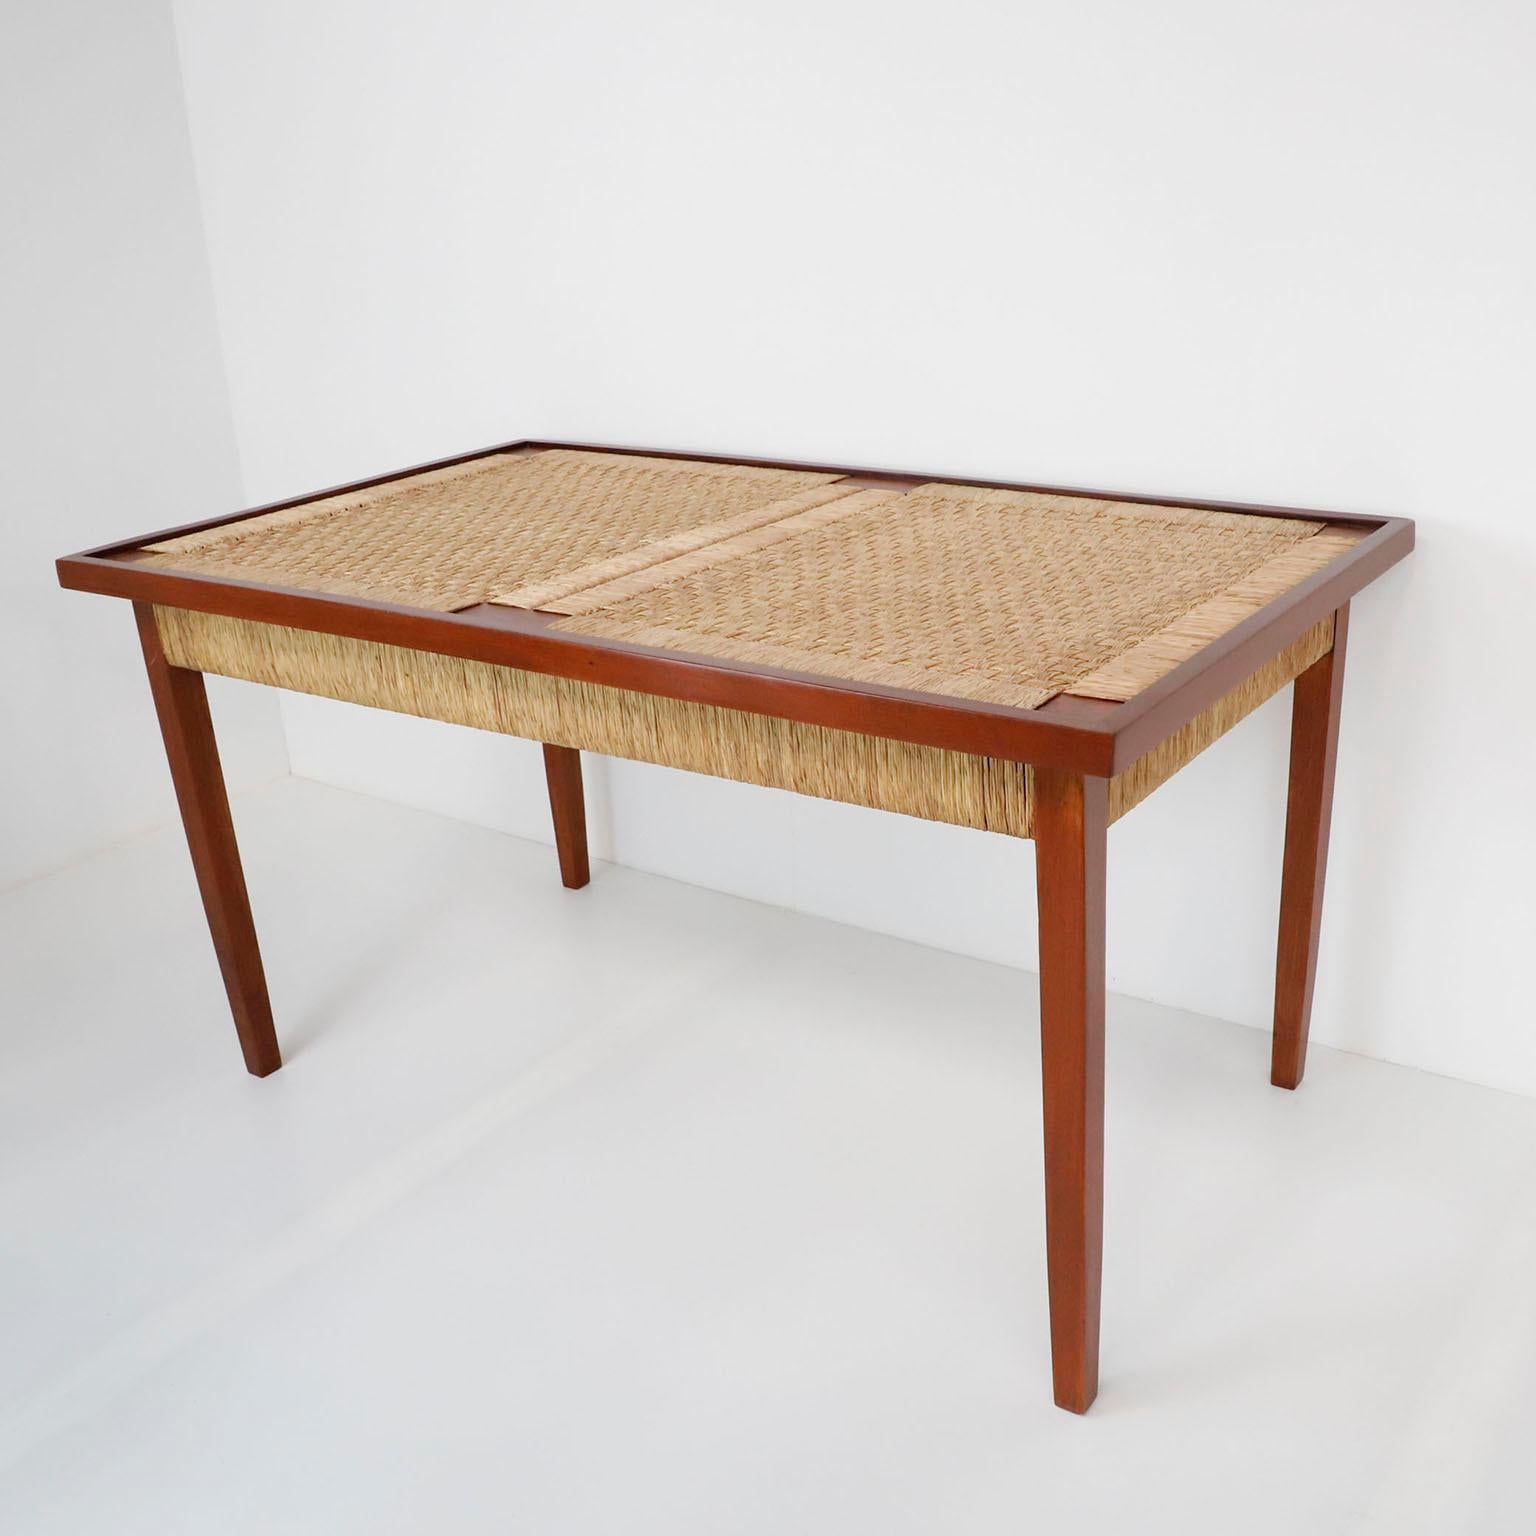 We offer this Dinning Table in the style of Michael Van Beuren made in premium mahogany wood and palm cords, circa 1960. Great vintage conditions.

Note: The table requires a glass but due to fragility we do not included.